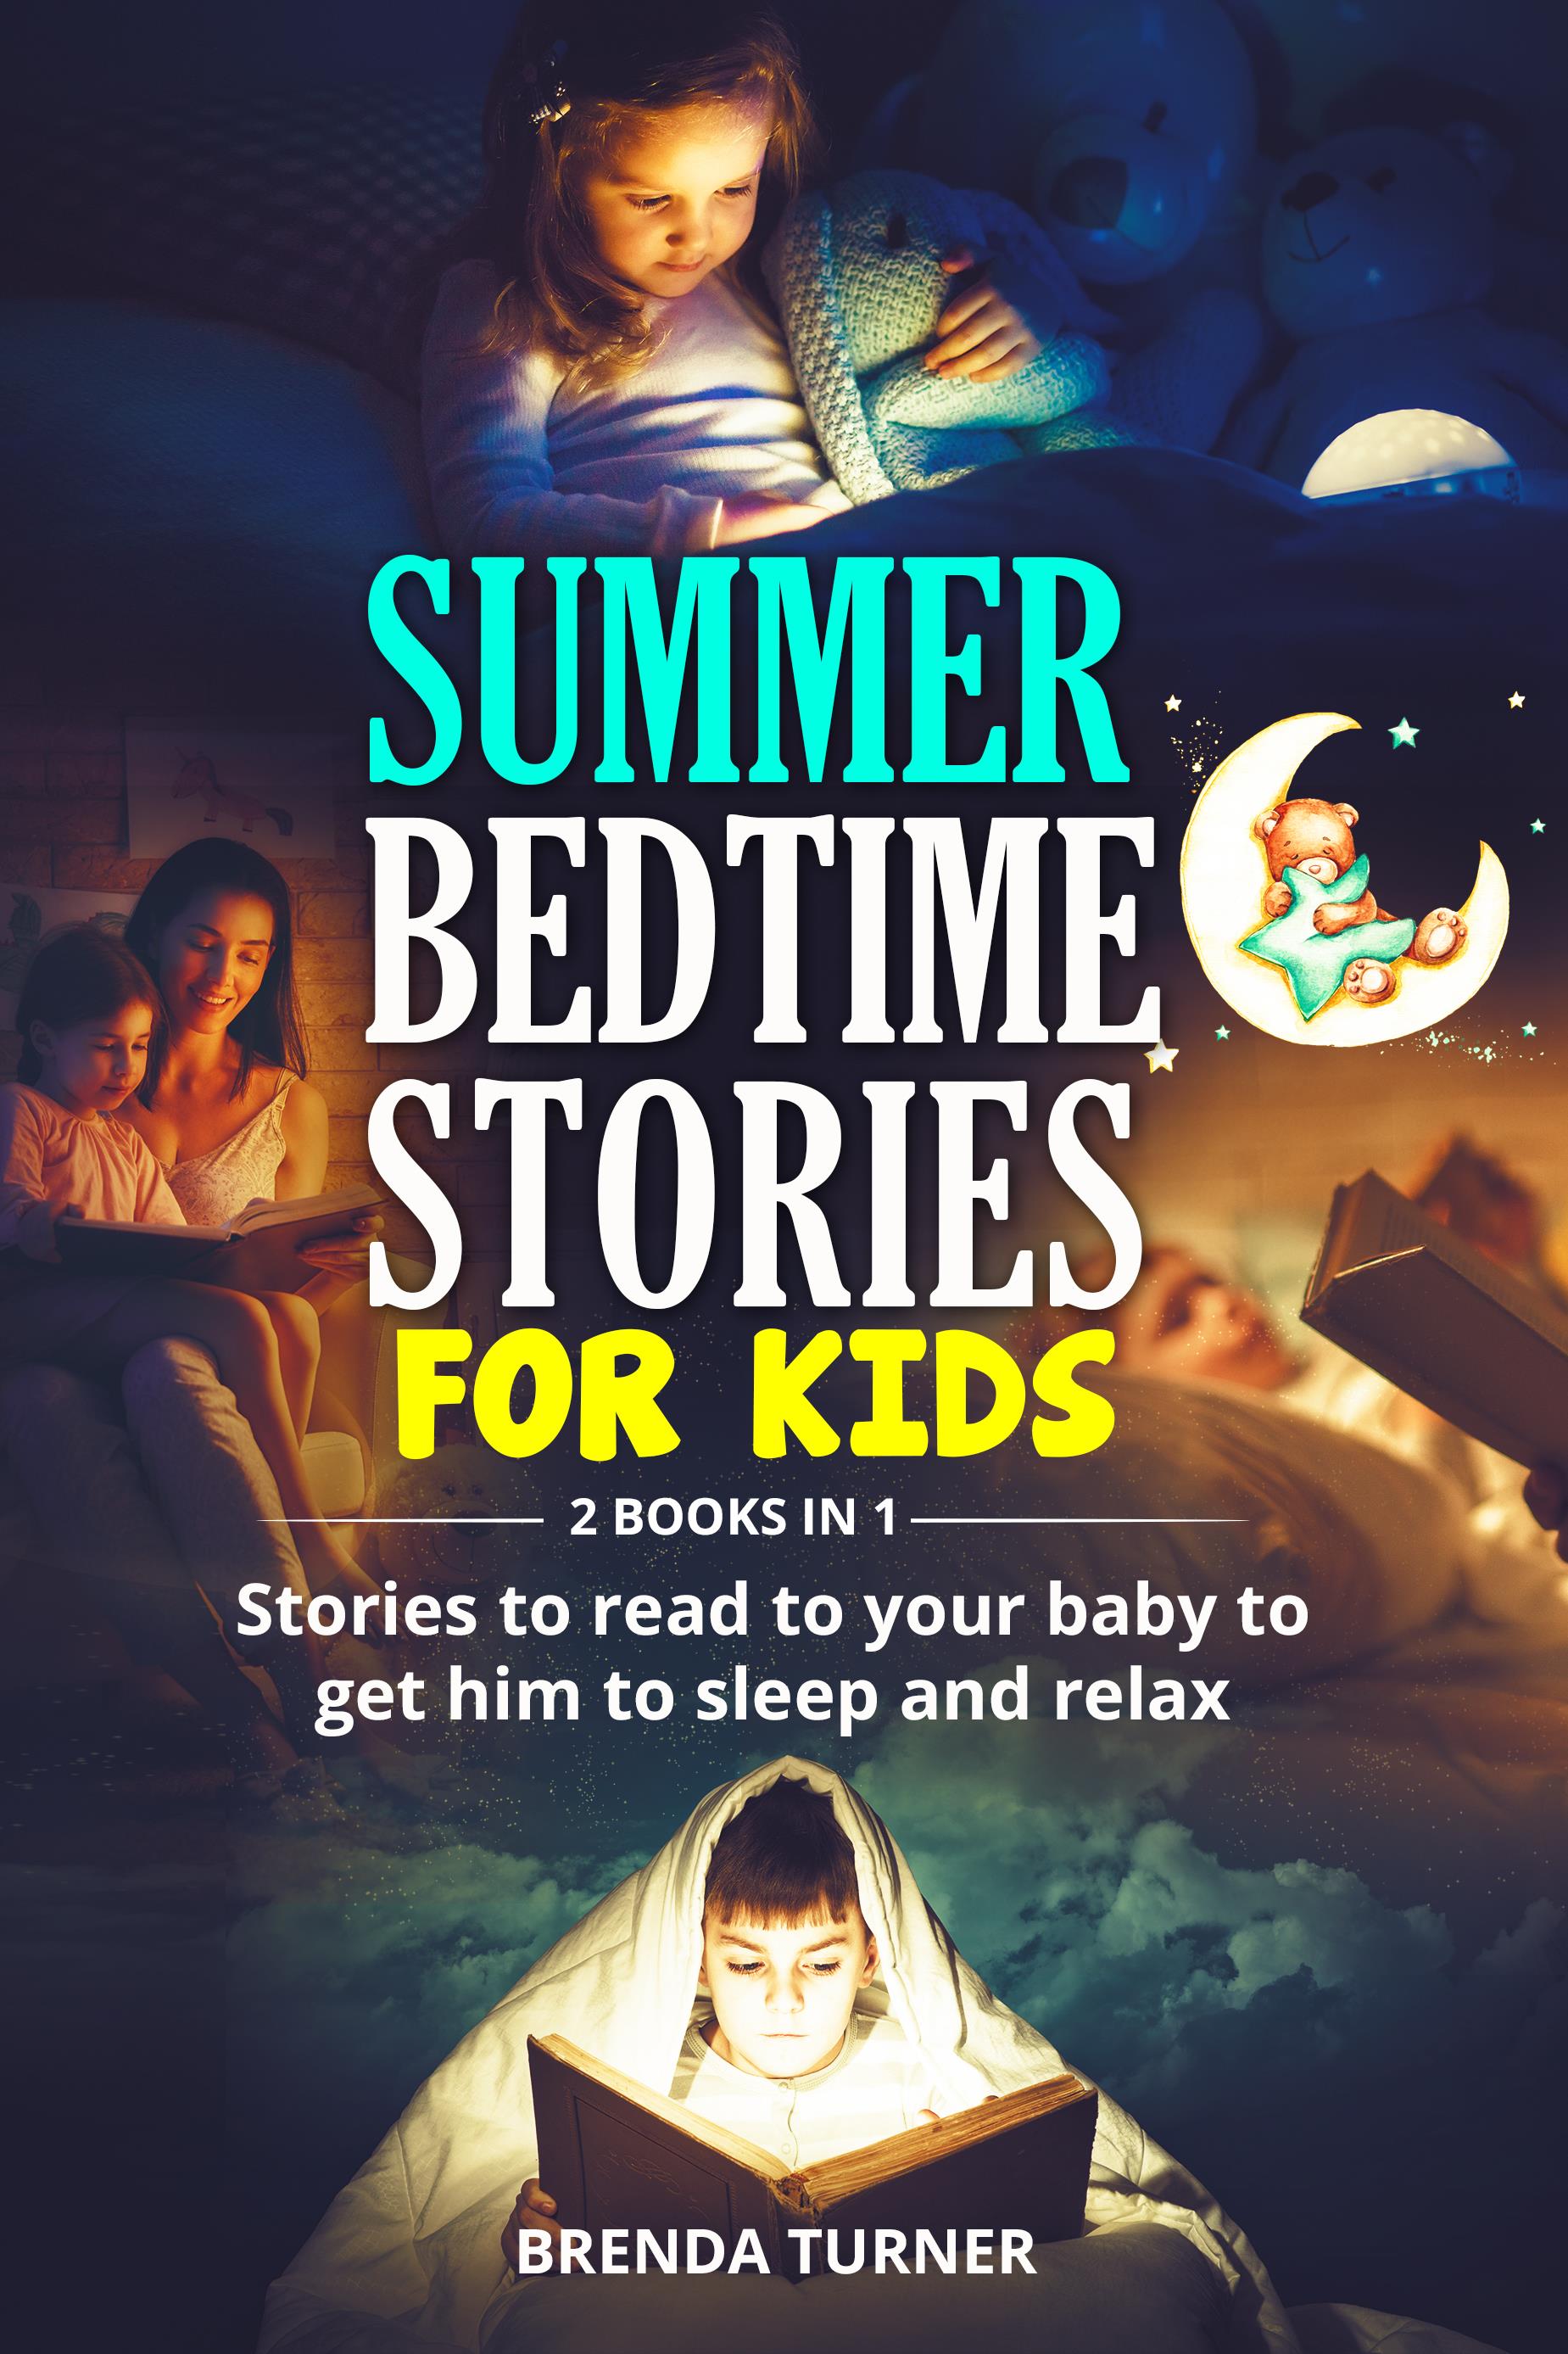 Summer bedtime stories for kids (2 Books in 1). Stories to read to your baby to get him to sleep and relax